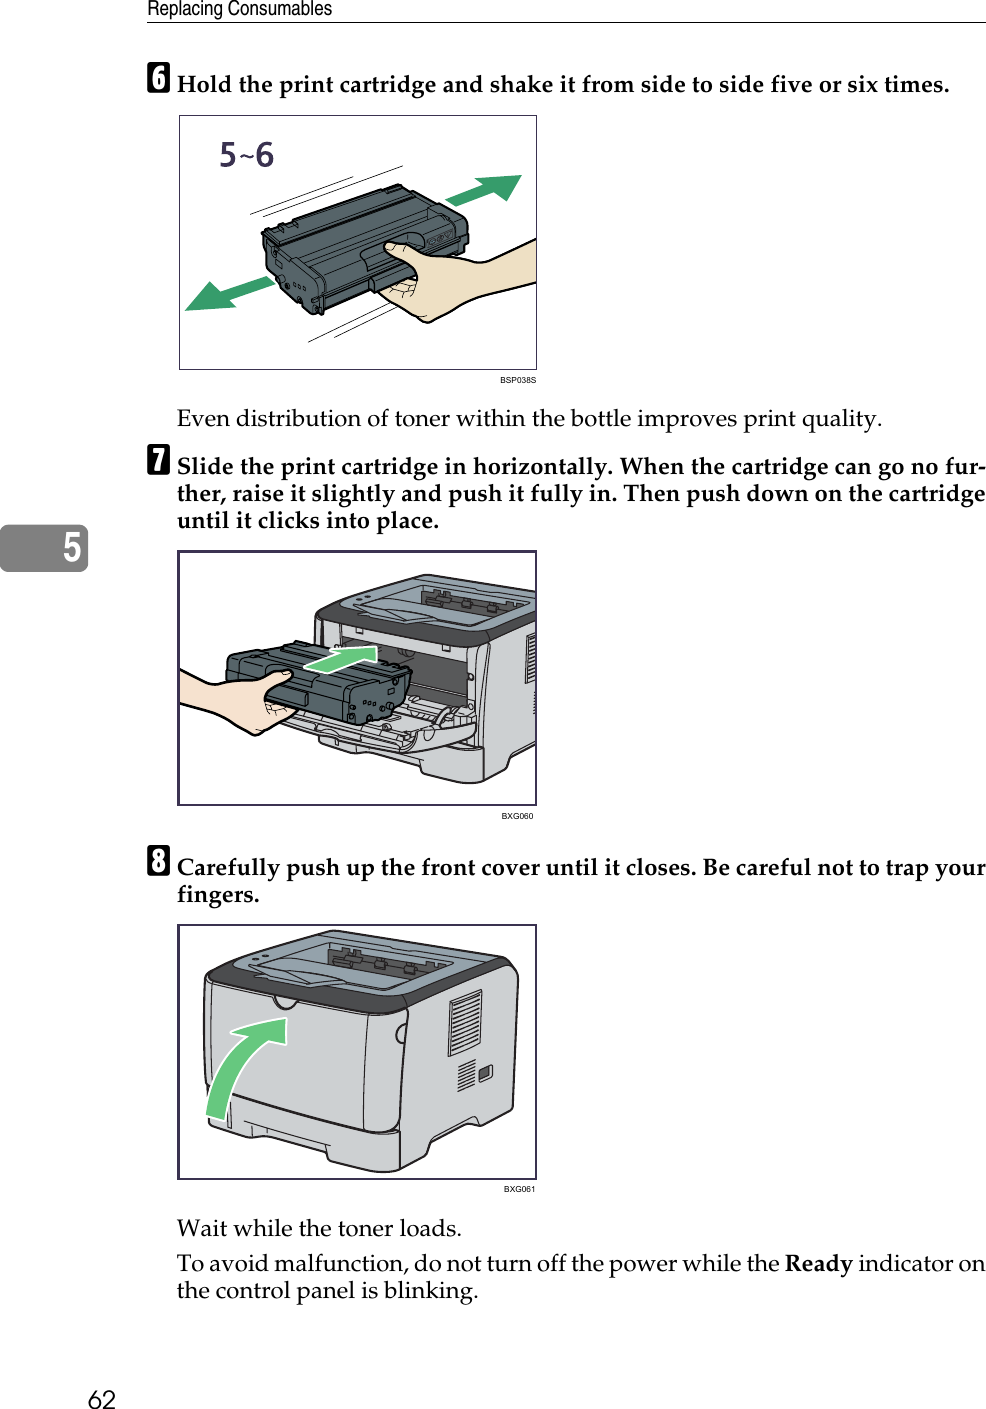 Replacing Consumables625FHold the print cartridge and shake it from side to side five or six times.Even distribution of toner within the bottle improves print quality.GSlide the print cartridge in horizontally. When the cartridge can go no fur-ther, raise it slightly and push it fully in. Then push down on the cartridgeuntil it clicks into place. HCarefully push up the front cover until it closes. Be careful not to trap yourfingers.Wait while the toner loads.To avoid malfunction, do not turn off the power while the Ready indicator onthe control panel is blinking.BSP038SBXG060BXG061